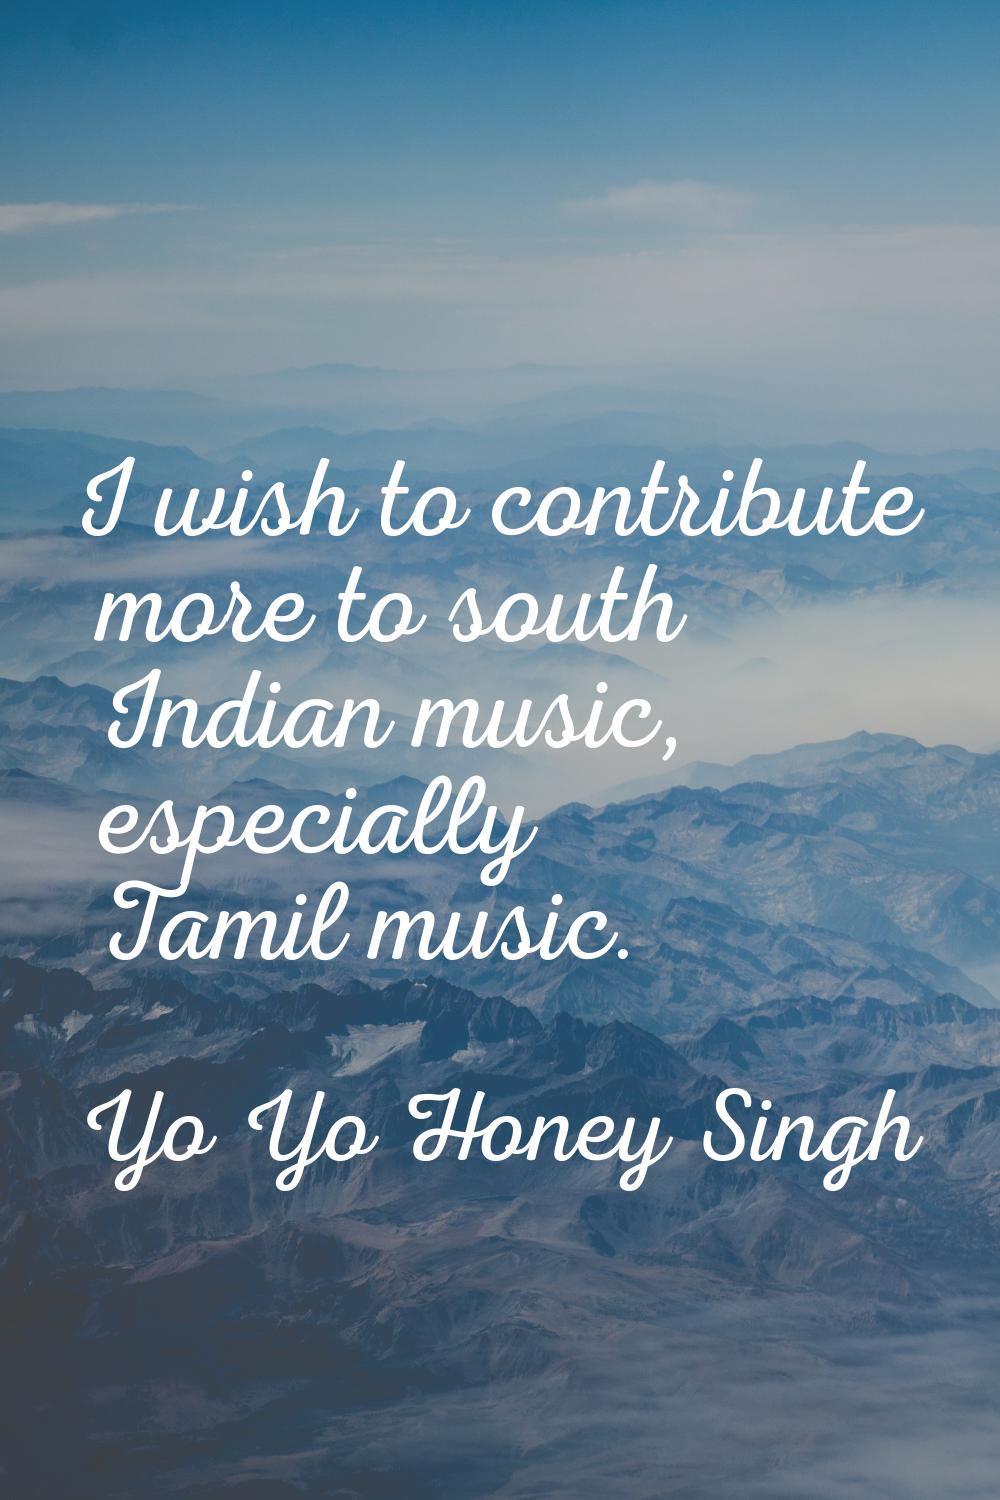 I wish to contribute more to south Indian music, especially Tamil music.